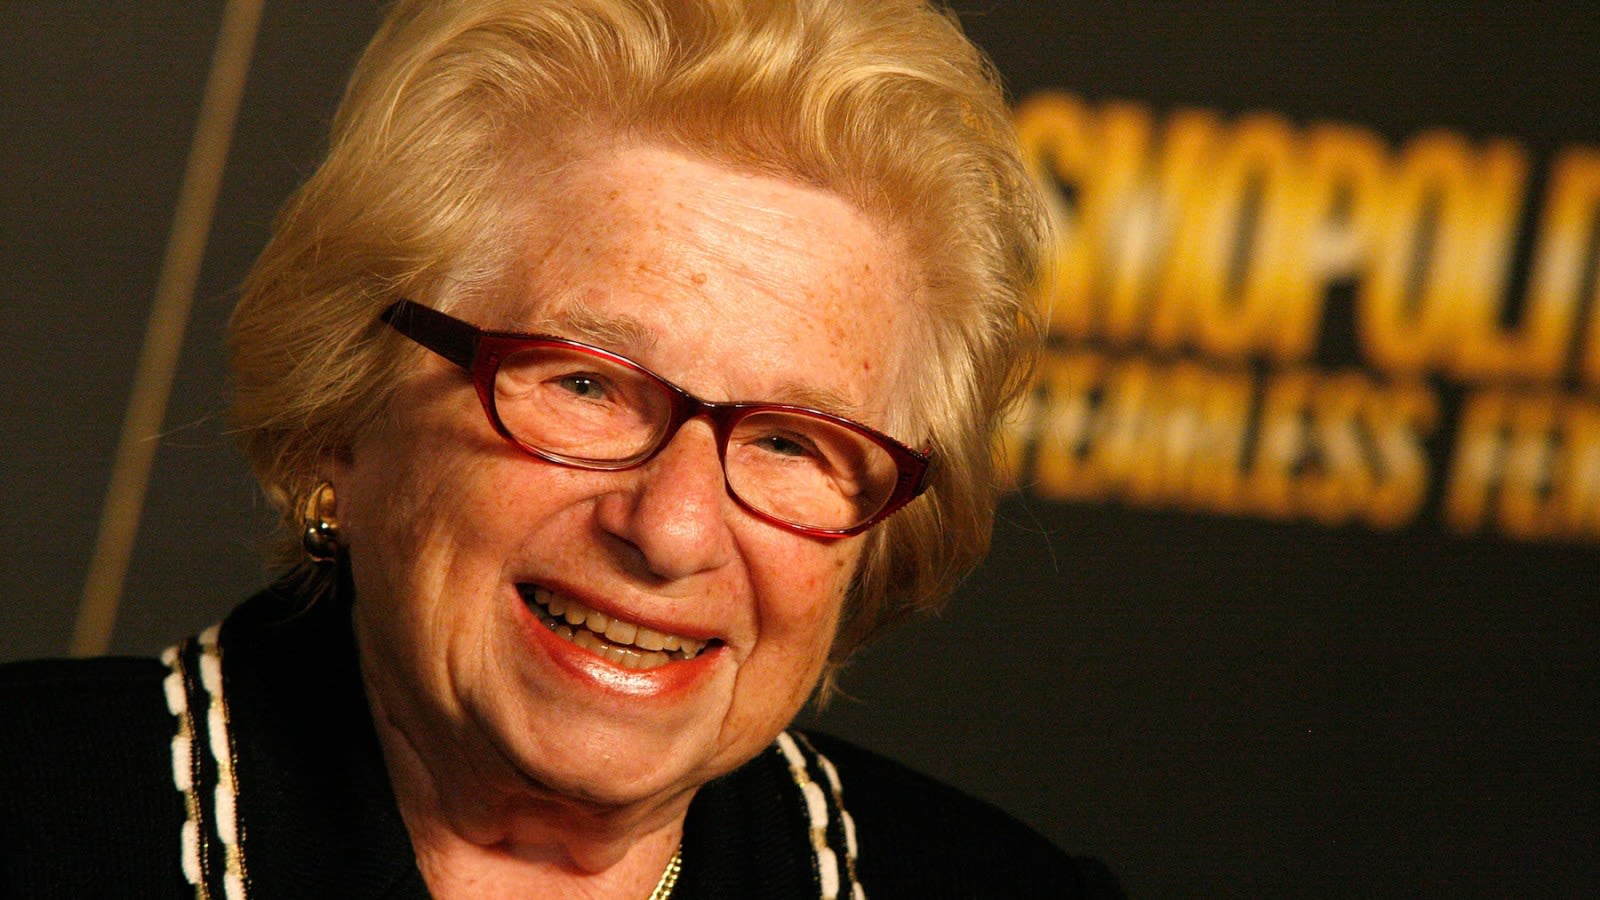 Dr. Ruth Westheimer, Famed Sex Therapist and Talk Show Host, Dead at 96